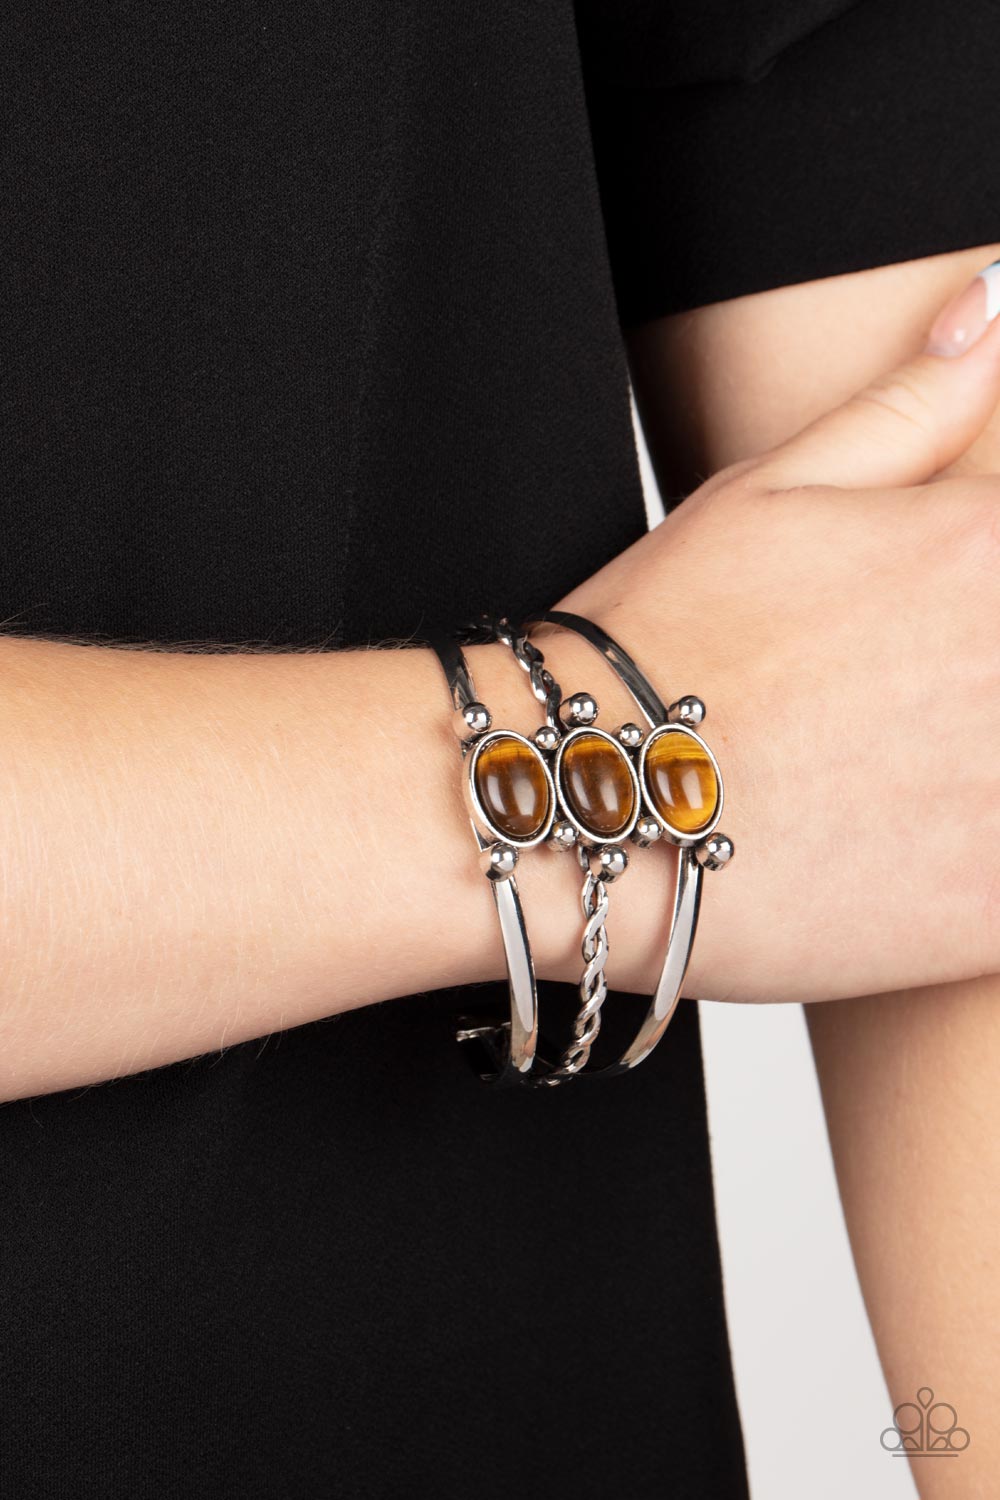 Extra Earthy - Brown Tiger's Eye Bracelets featuring silver studded fittings, an earthy trio of oval tiger's eye stones adorn the center of an ornately layered silver cuff for a seasonal finish.  Sold as one individual bracelet.